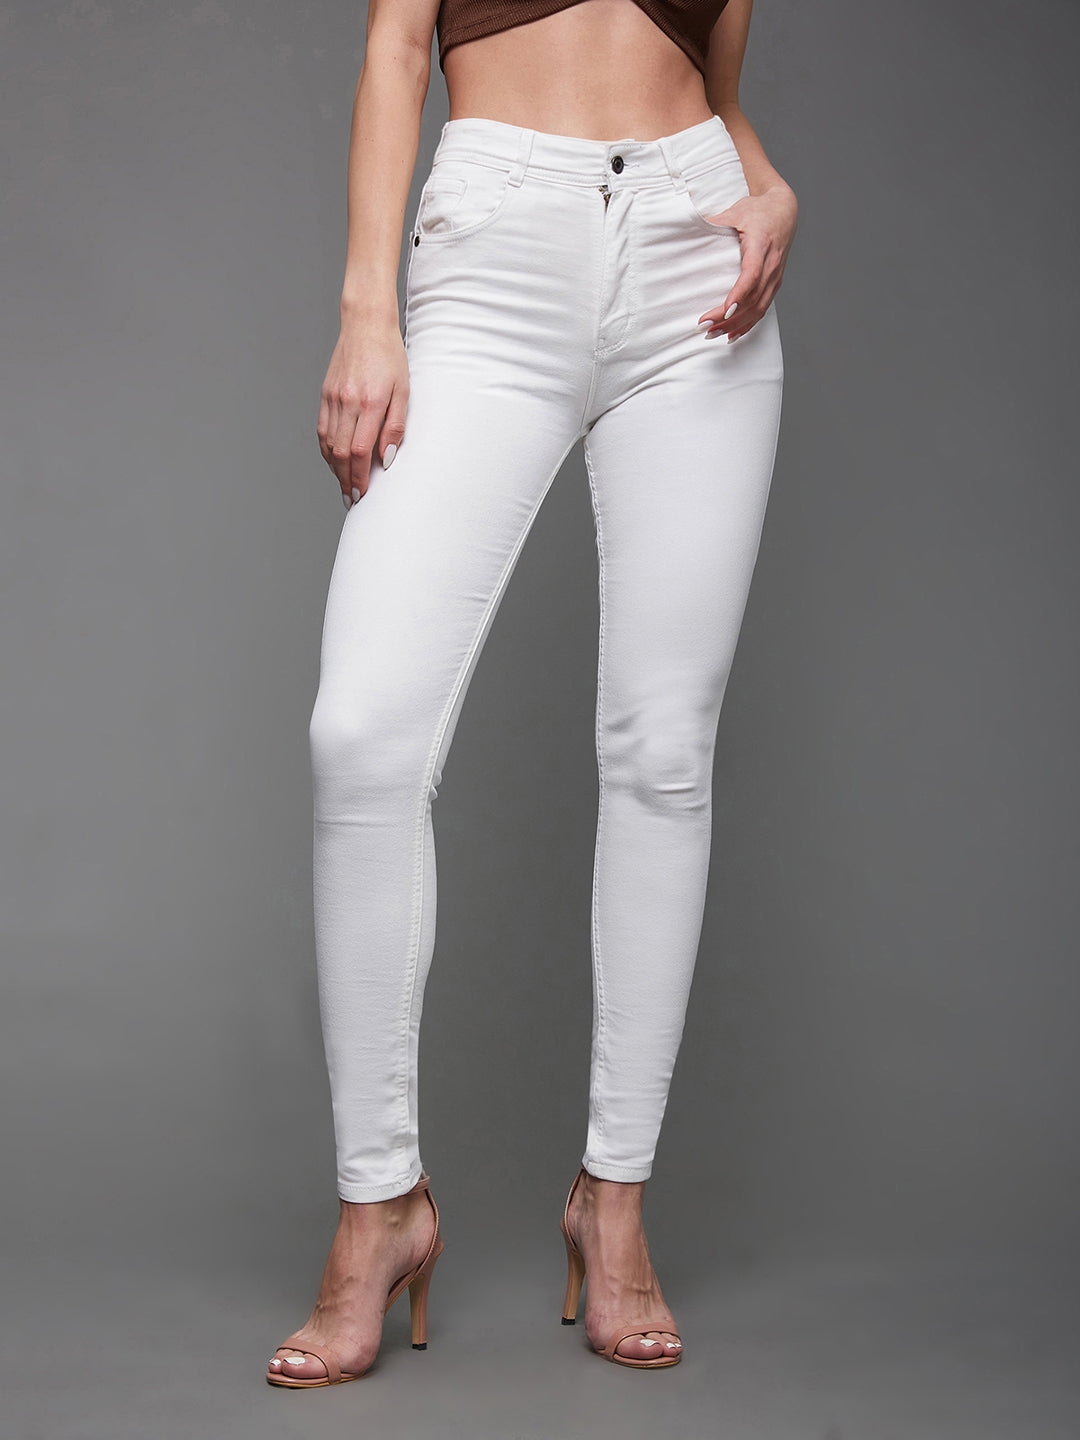 MISS CHASE | White Skinny High Rise Clean Look Bleached Regular Length Stretchable Denim Jeans